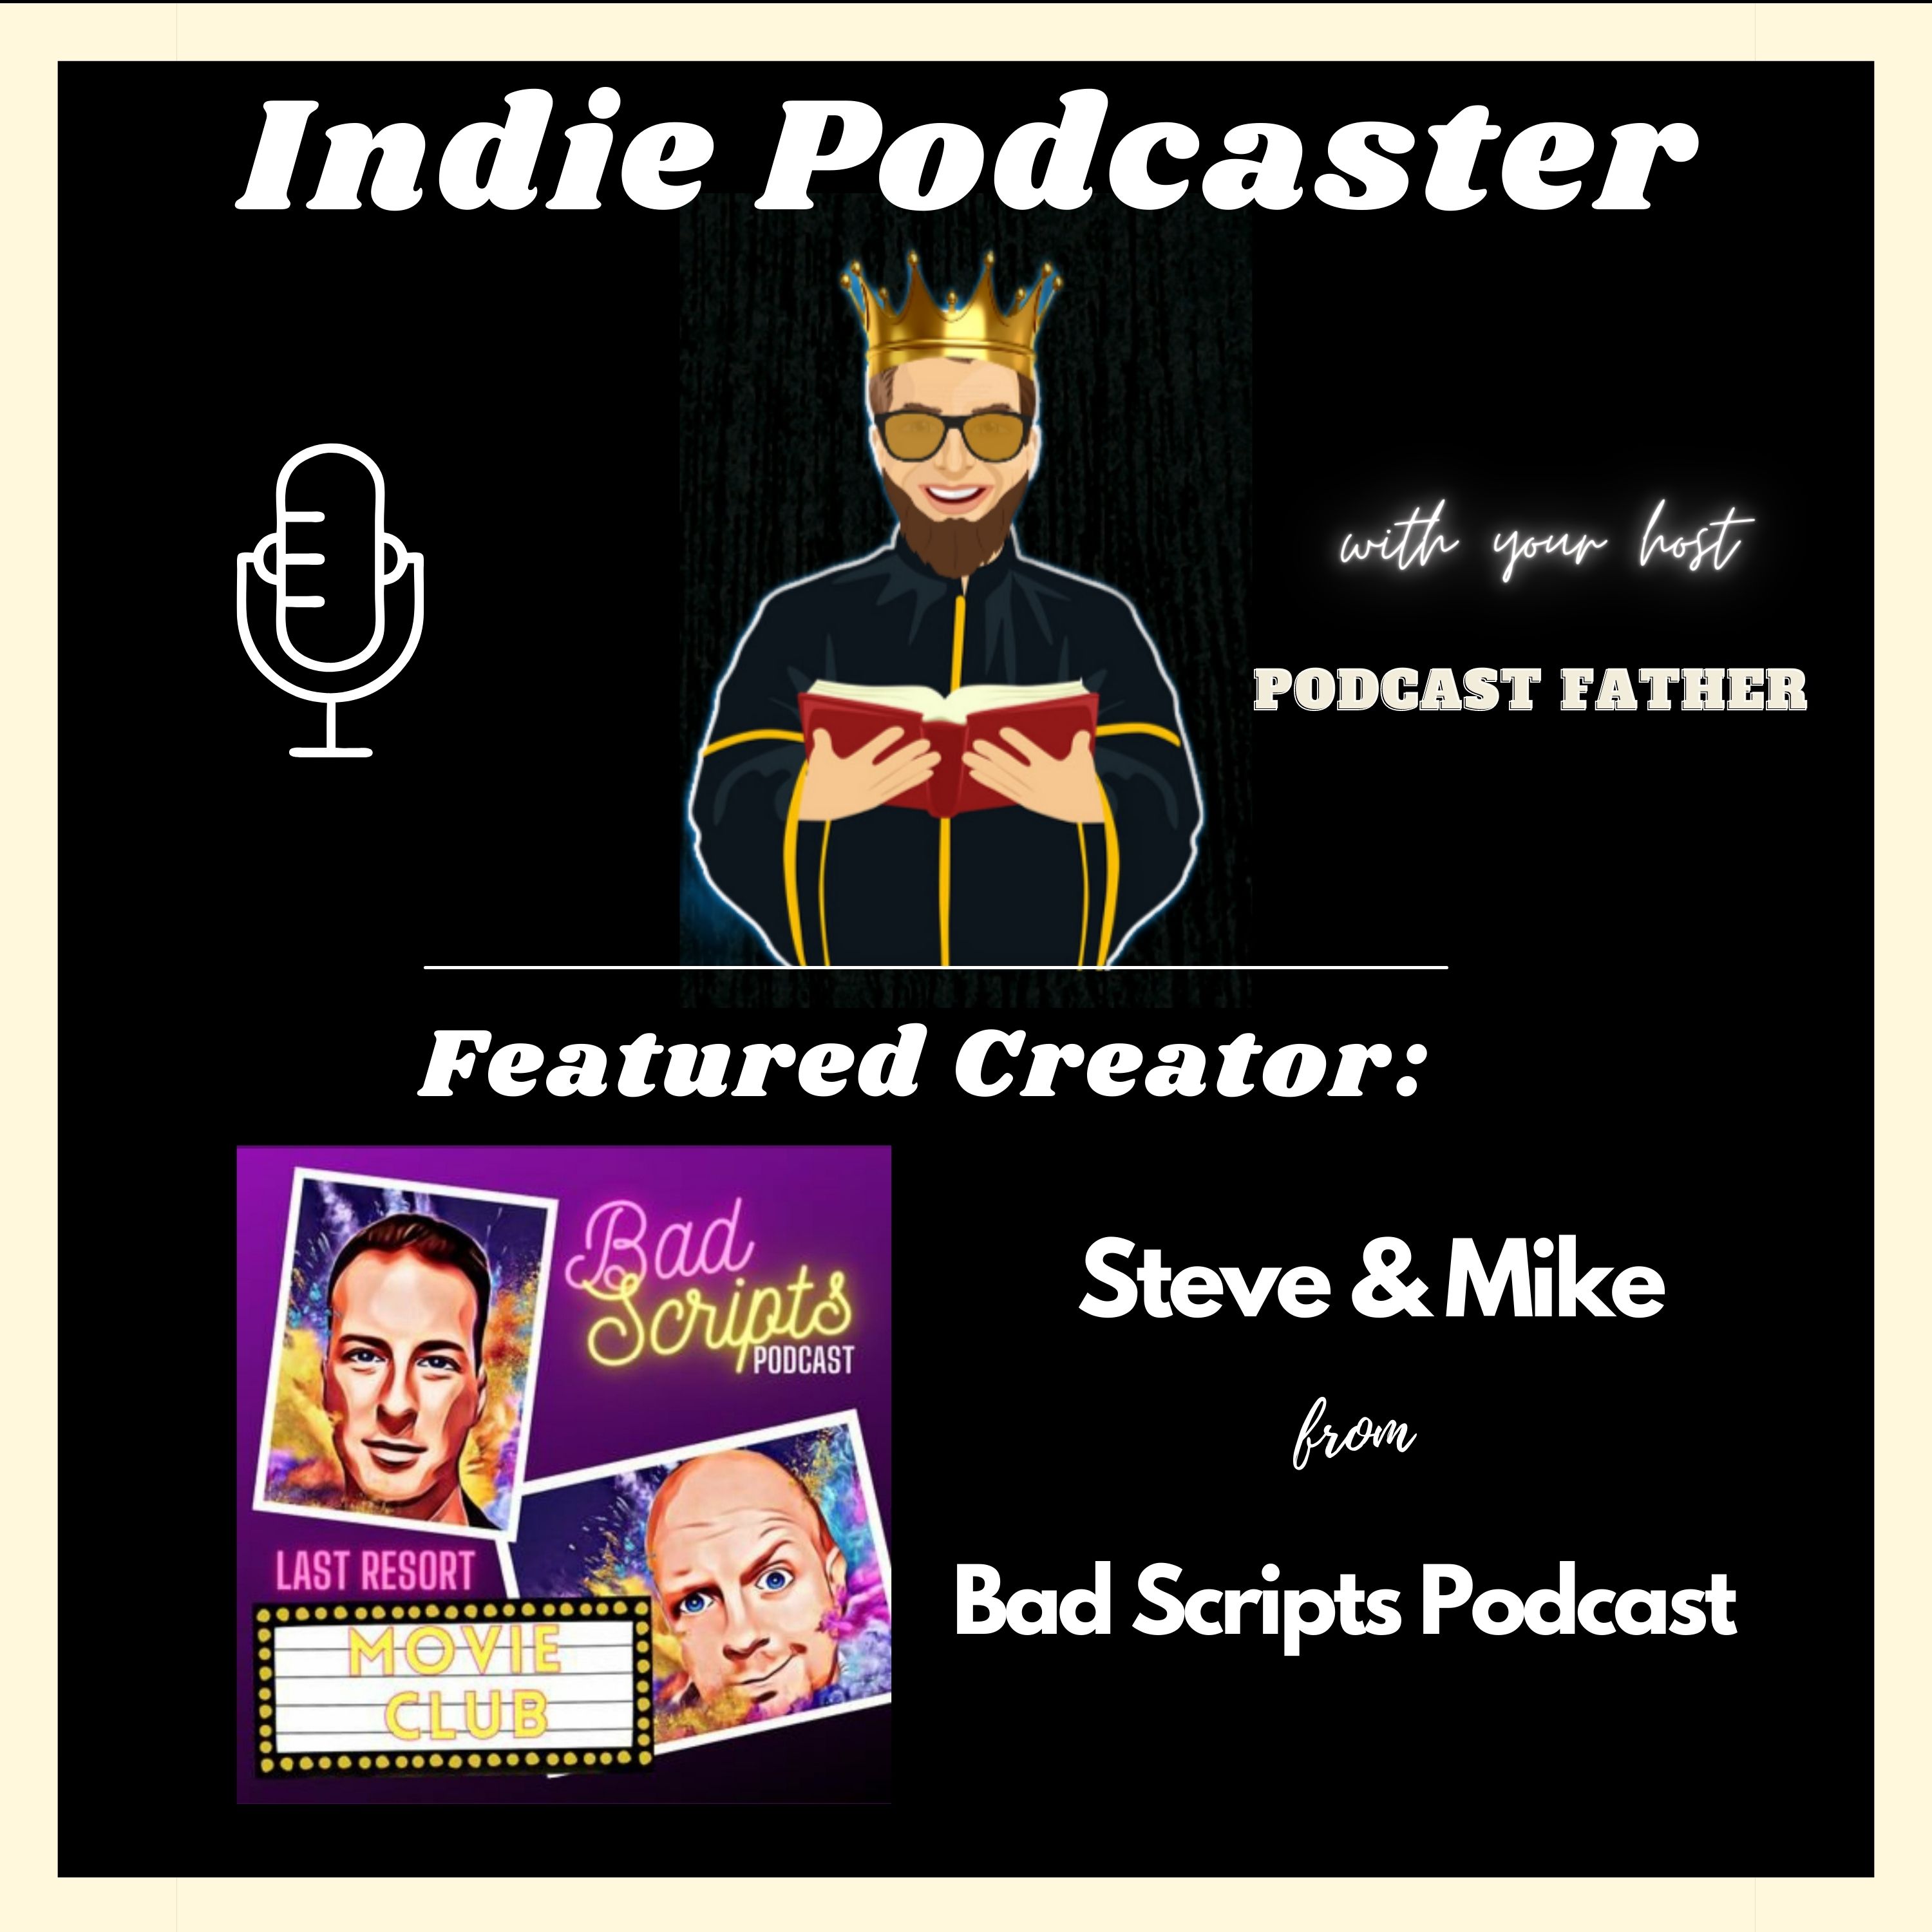 Steve & Mike from Bad Scripts Podcast Image